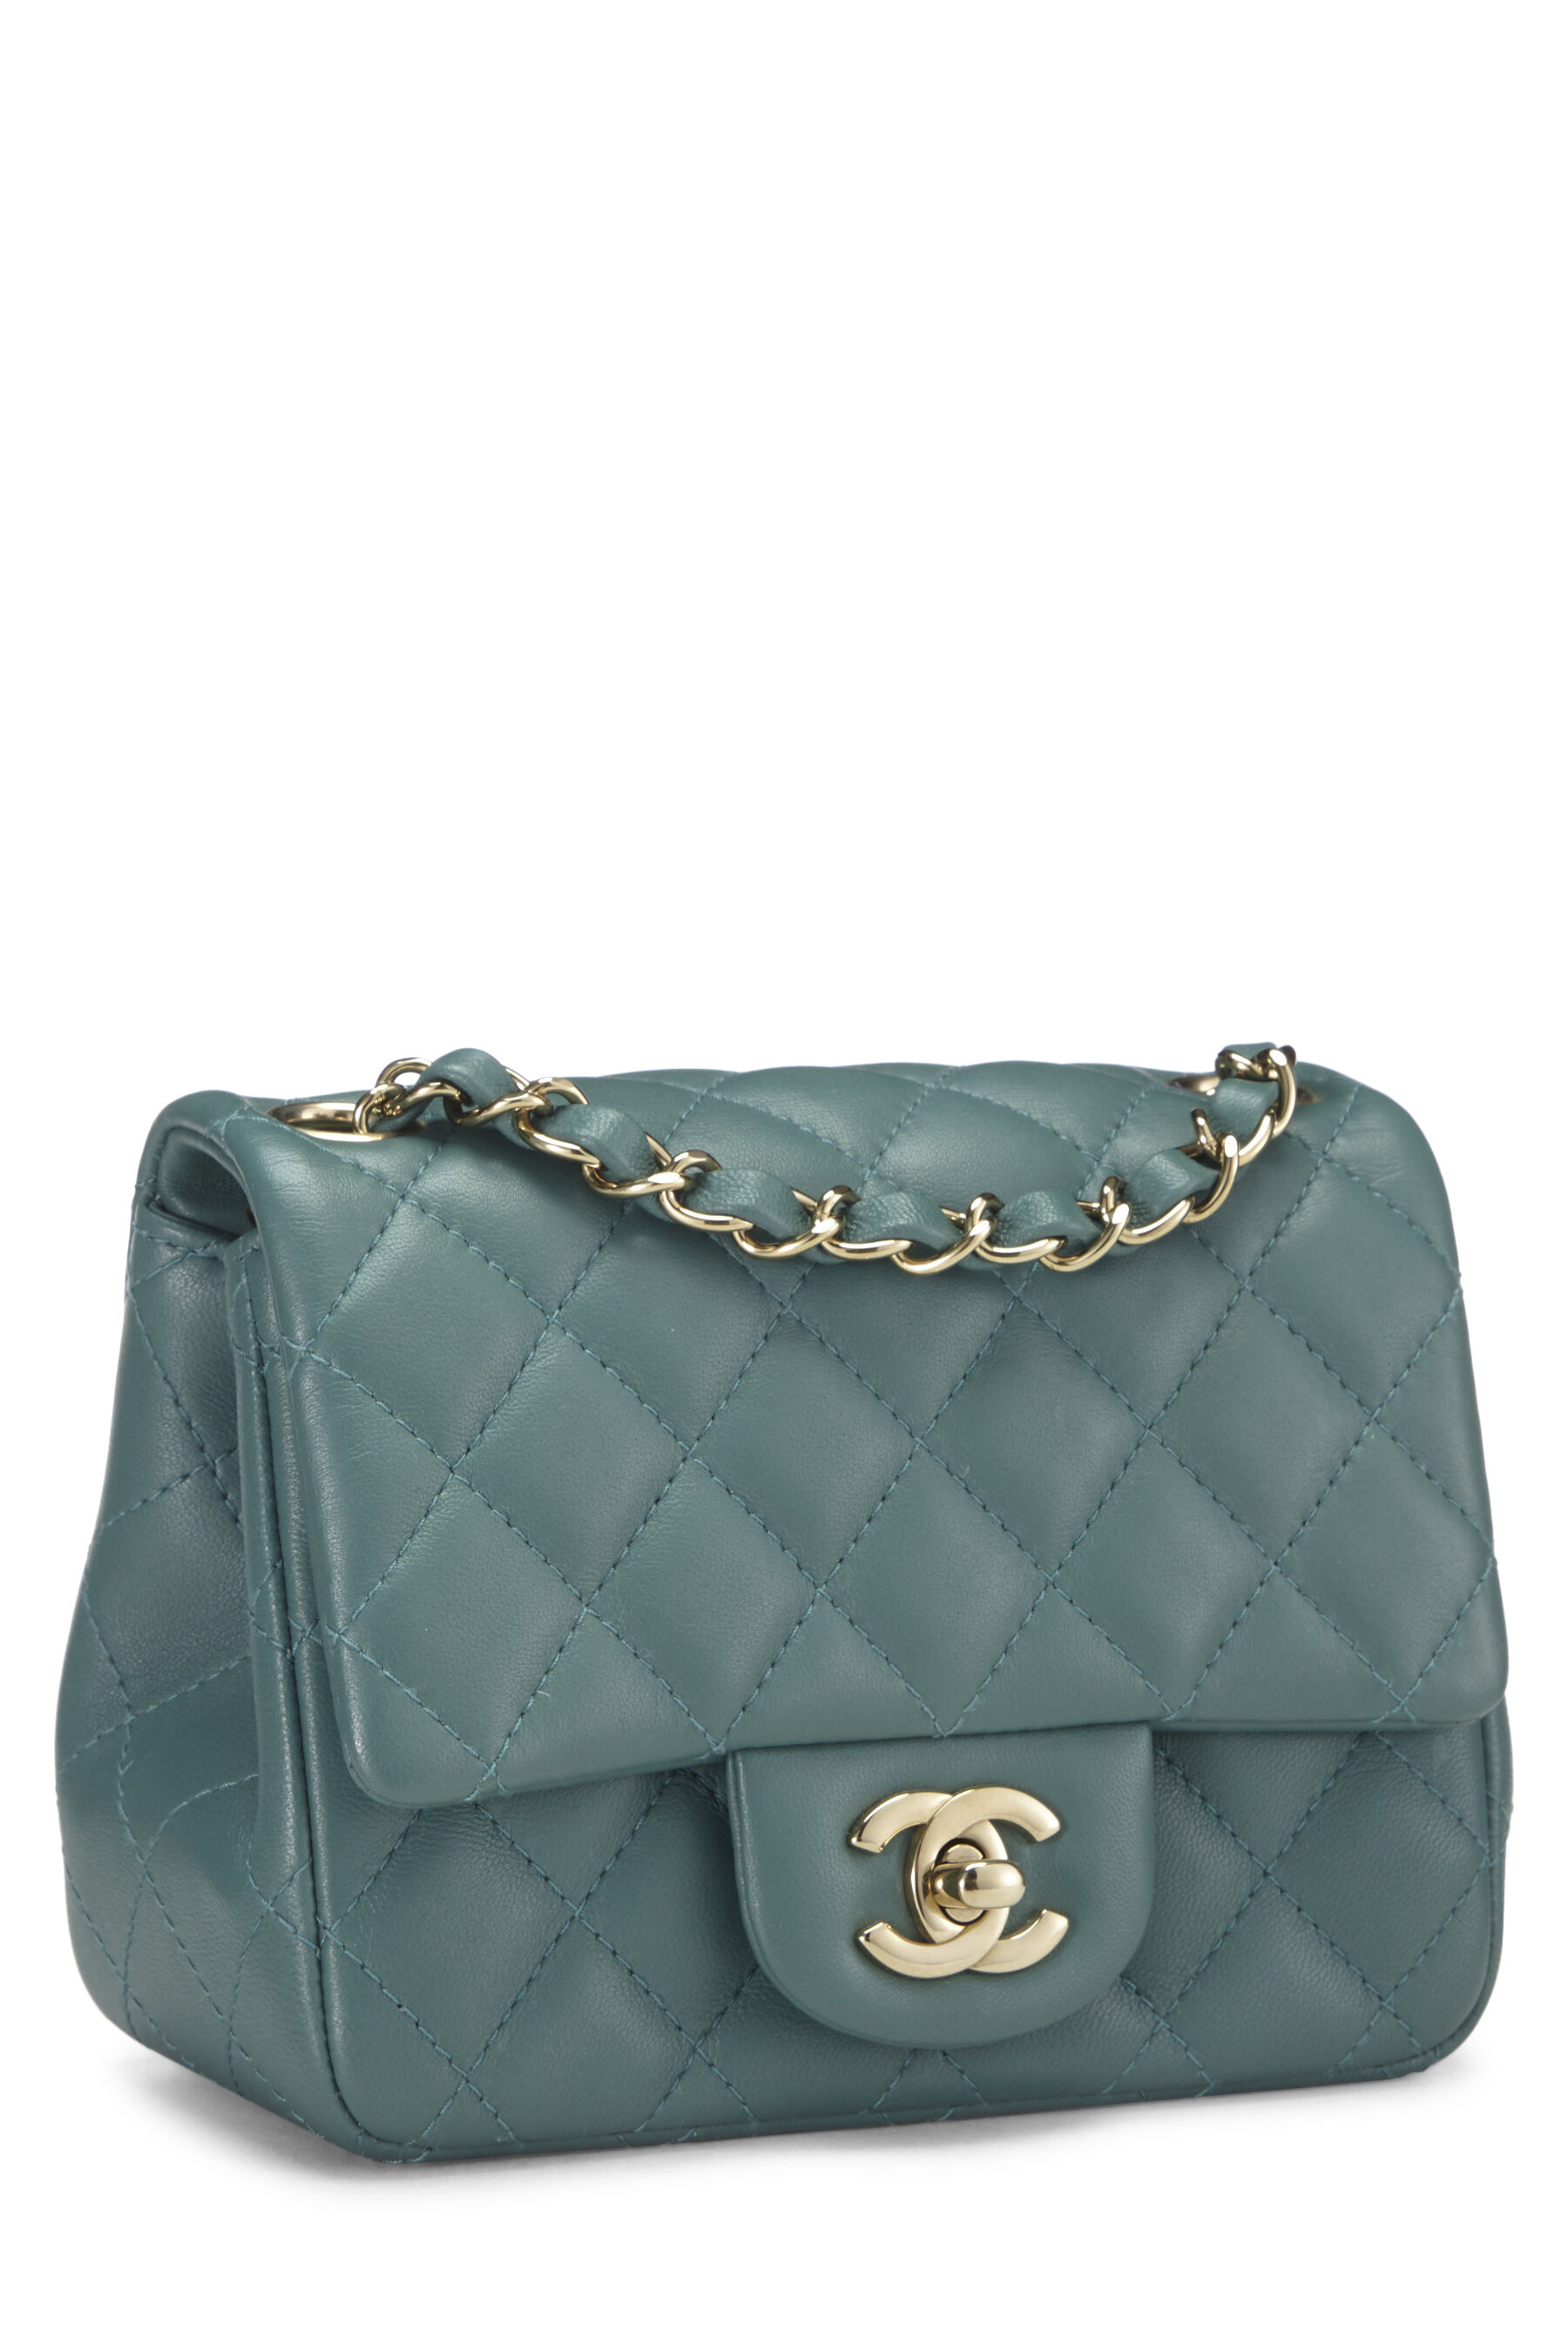 SHOP - CHANEL - Page 4 - VLuxeStyle